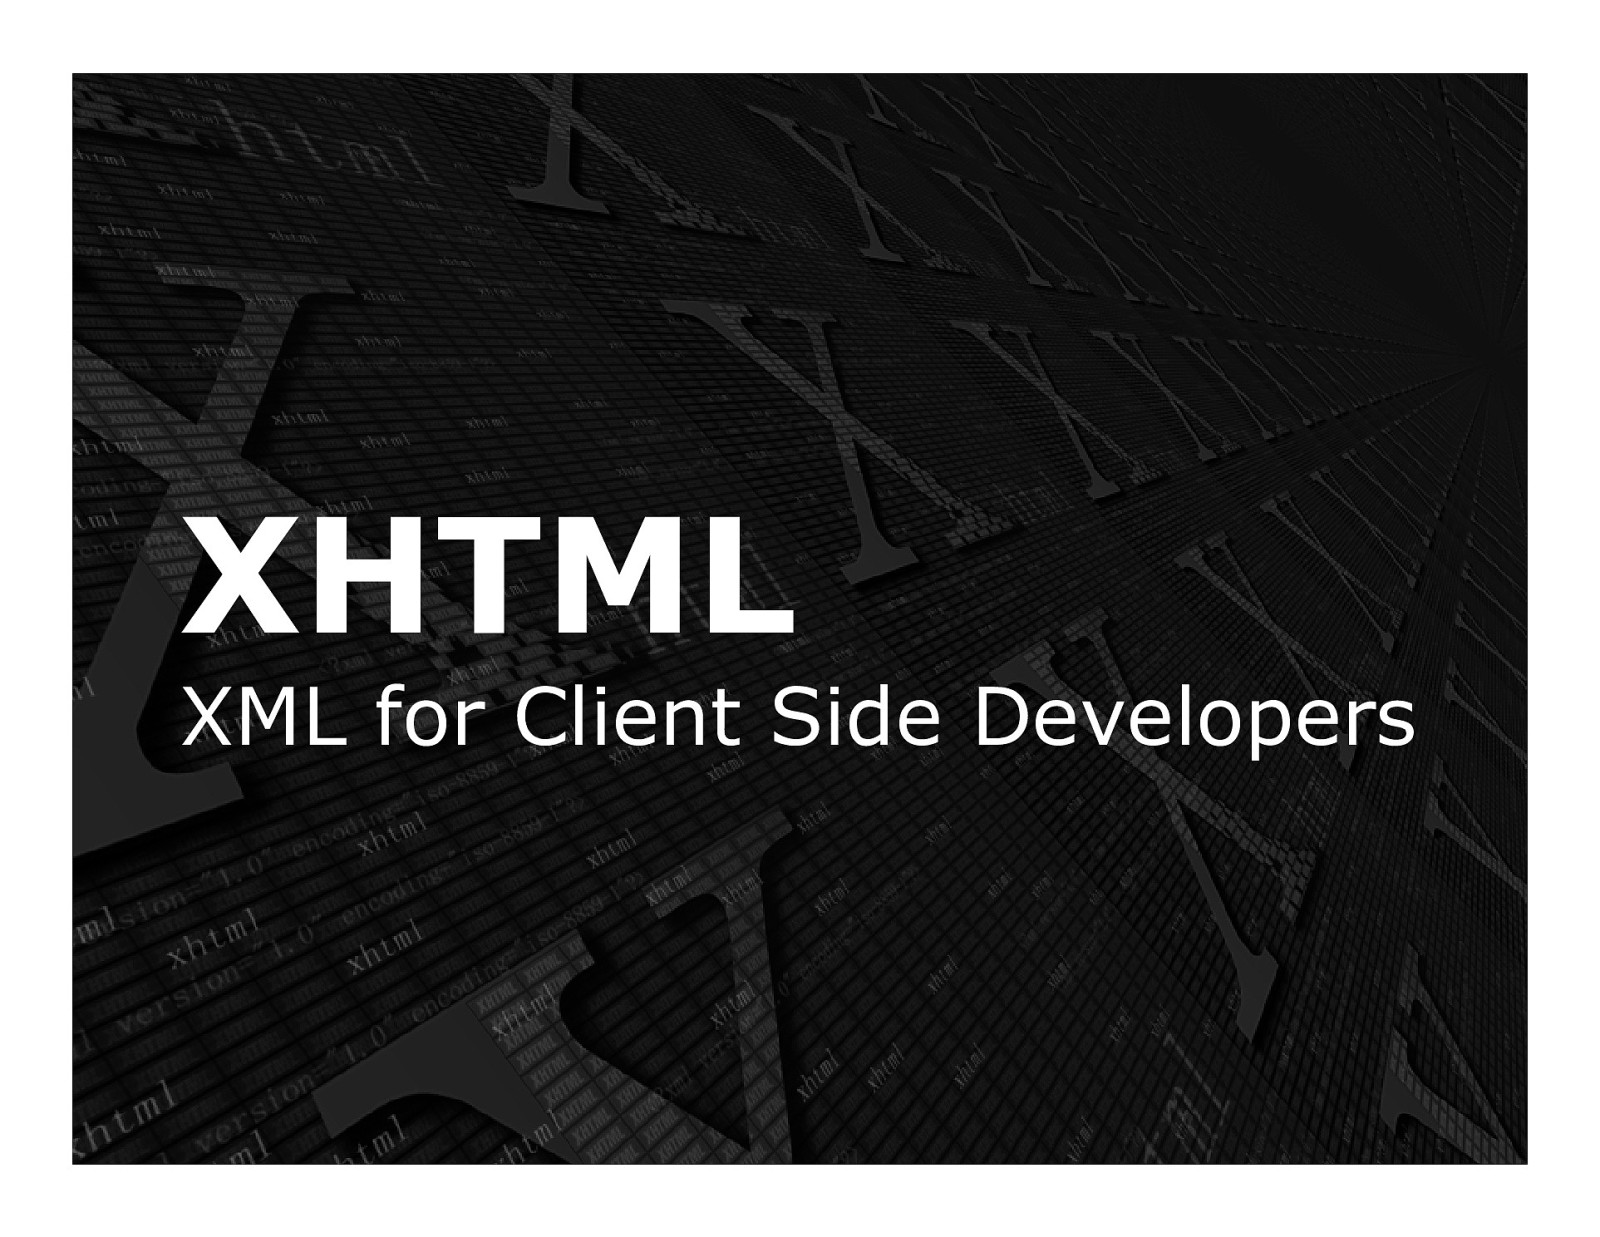 XHTML: XML for Client-Side Developers